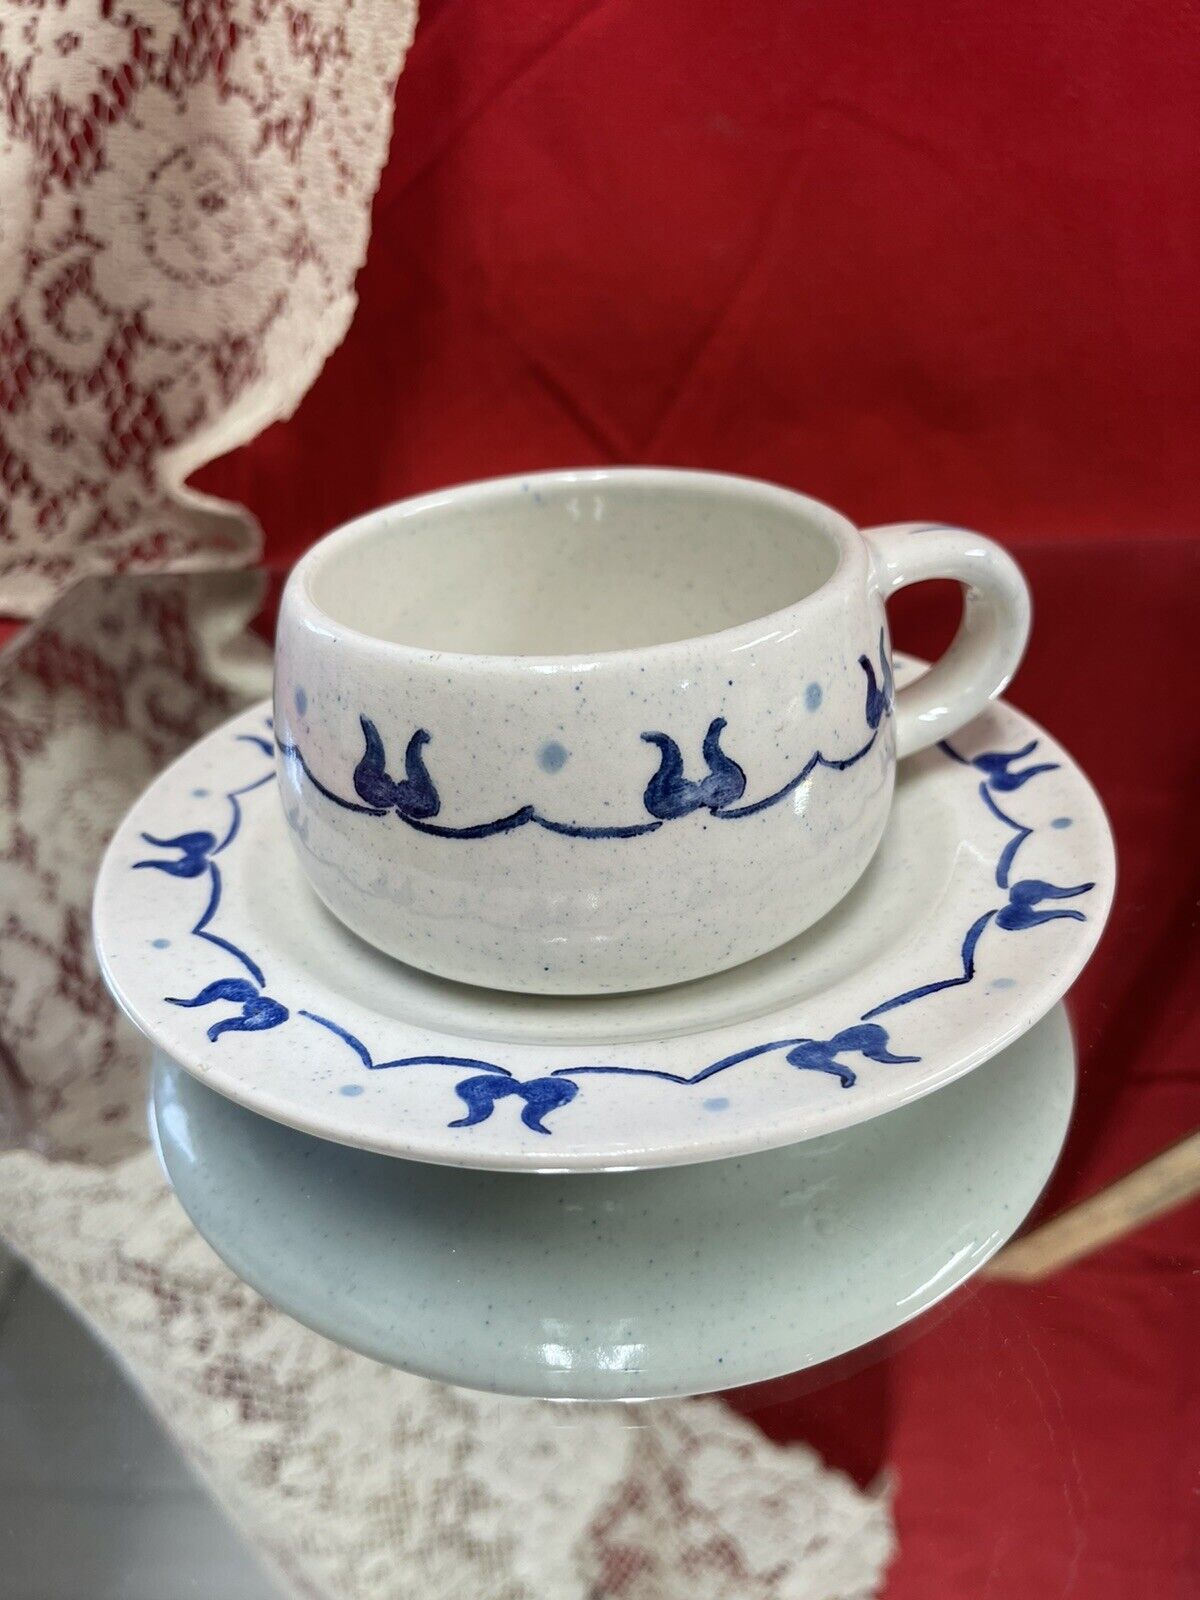 Primary image for Metlox - Poppytrail - Vernon Provincial Blue Coffee Cup & Saucer